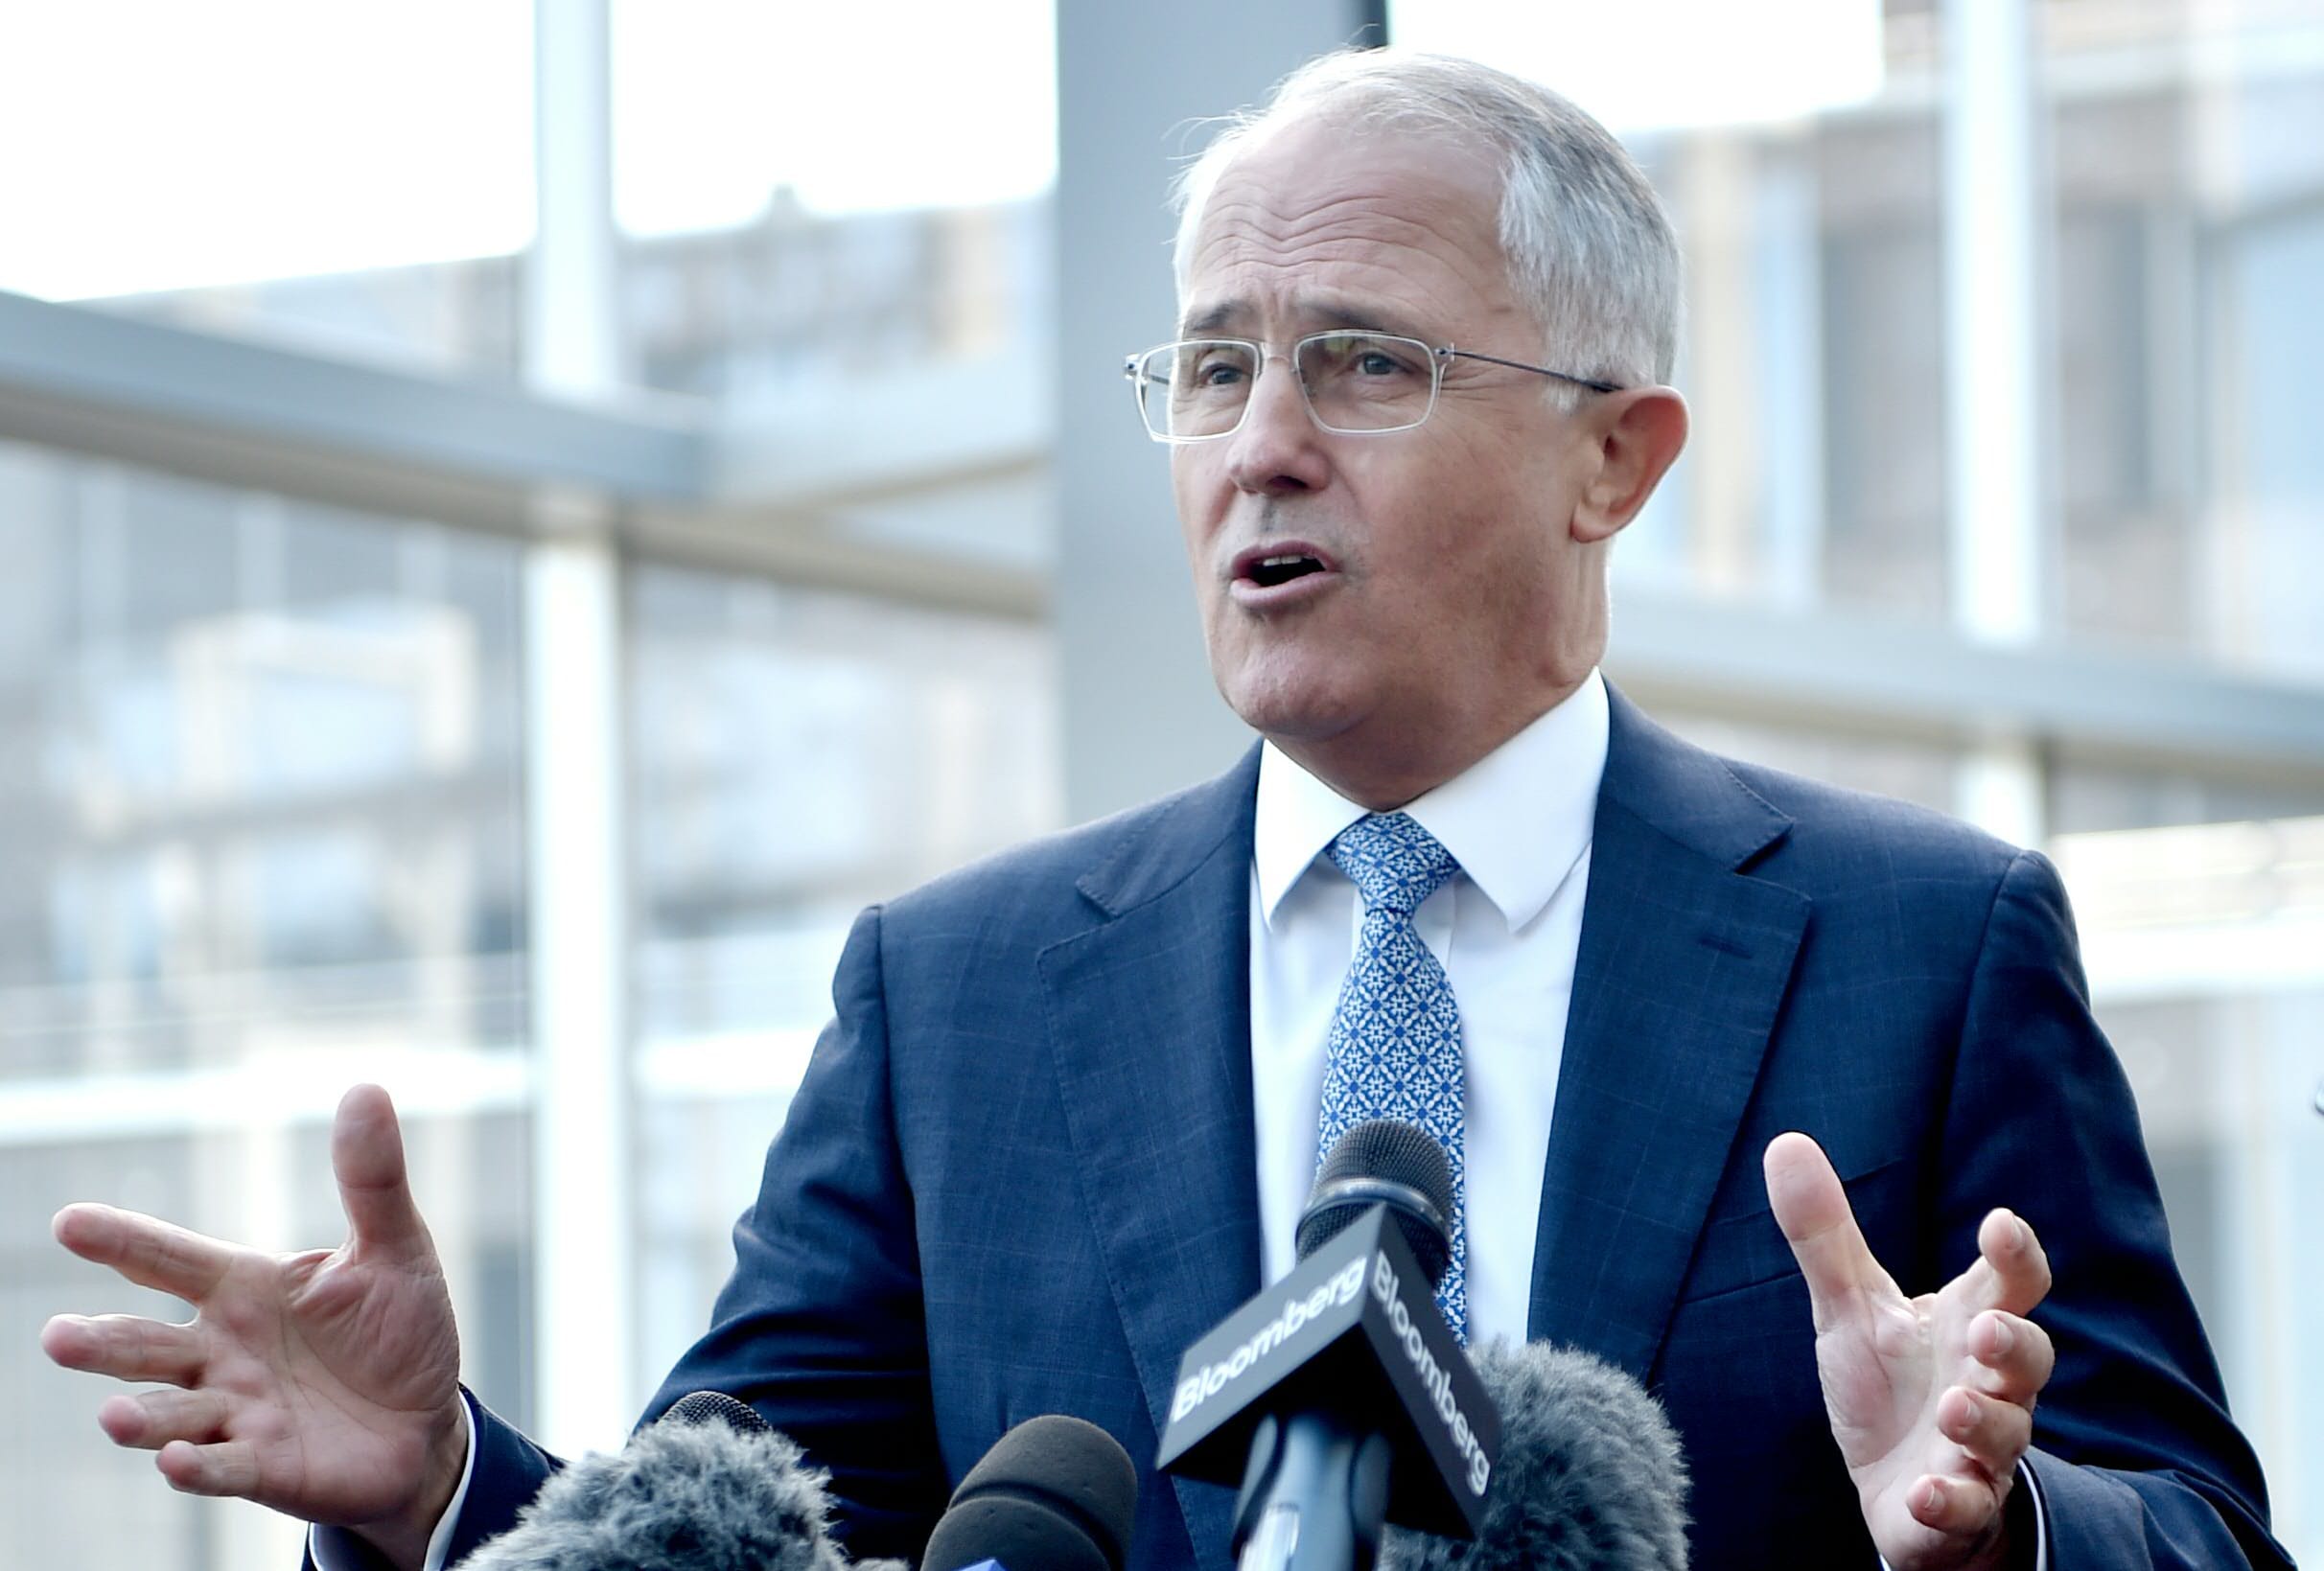 Australian Prime Minister Malcolm Turnbull speaks to reporters on 23 March in Sydney.